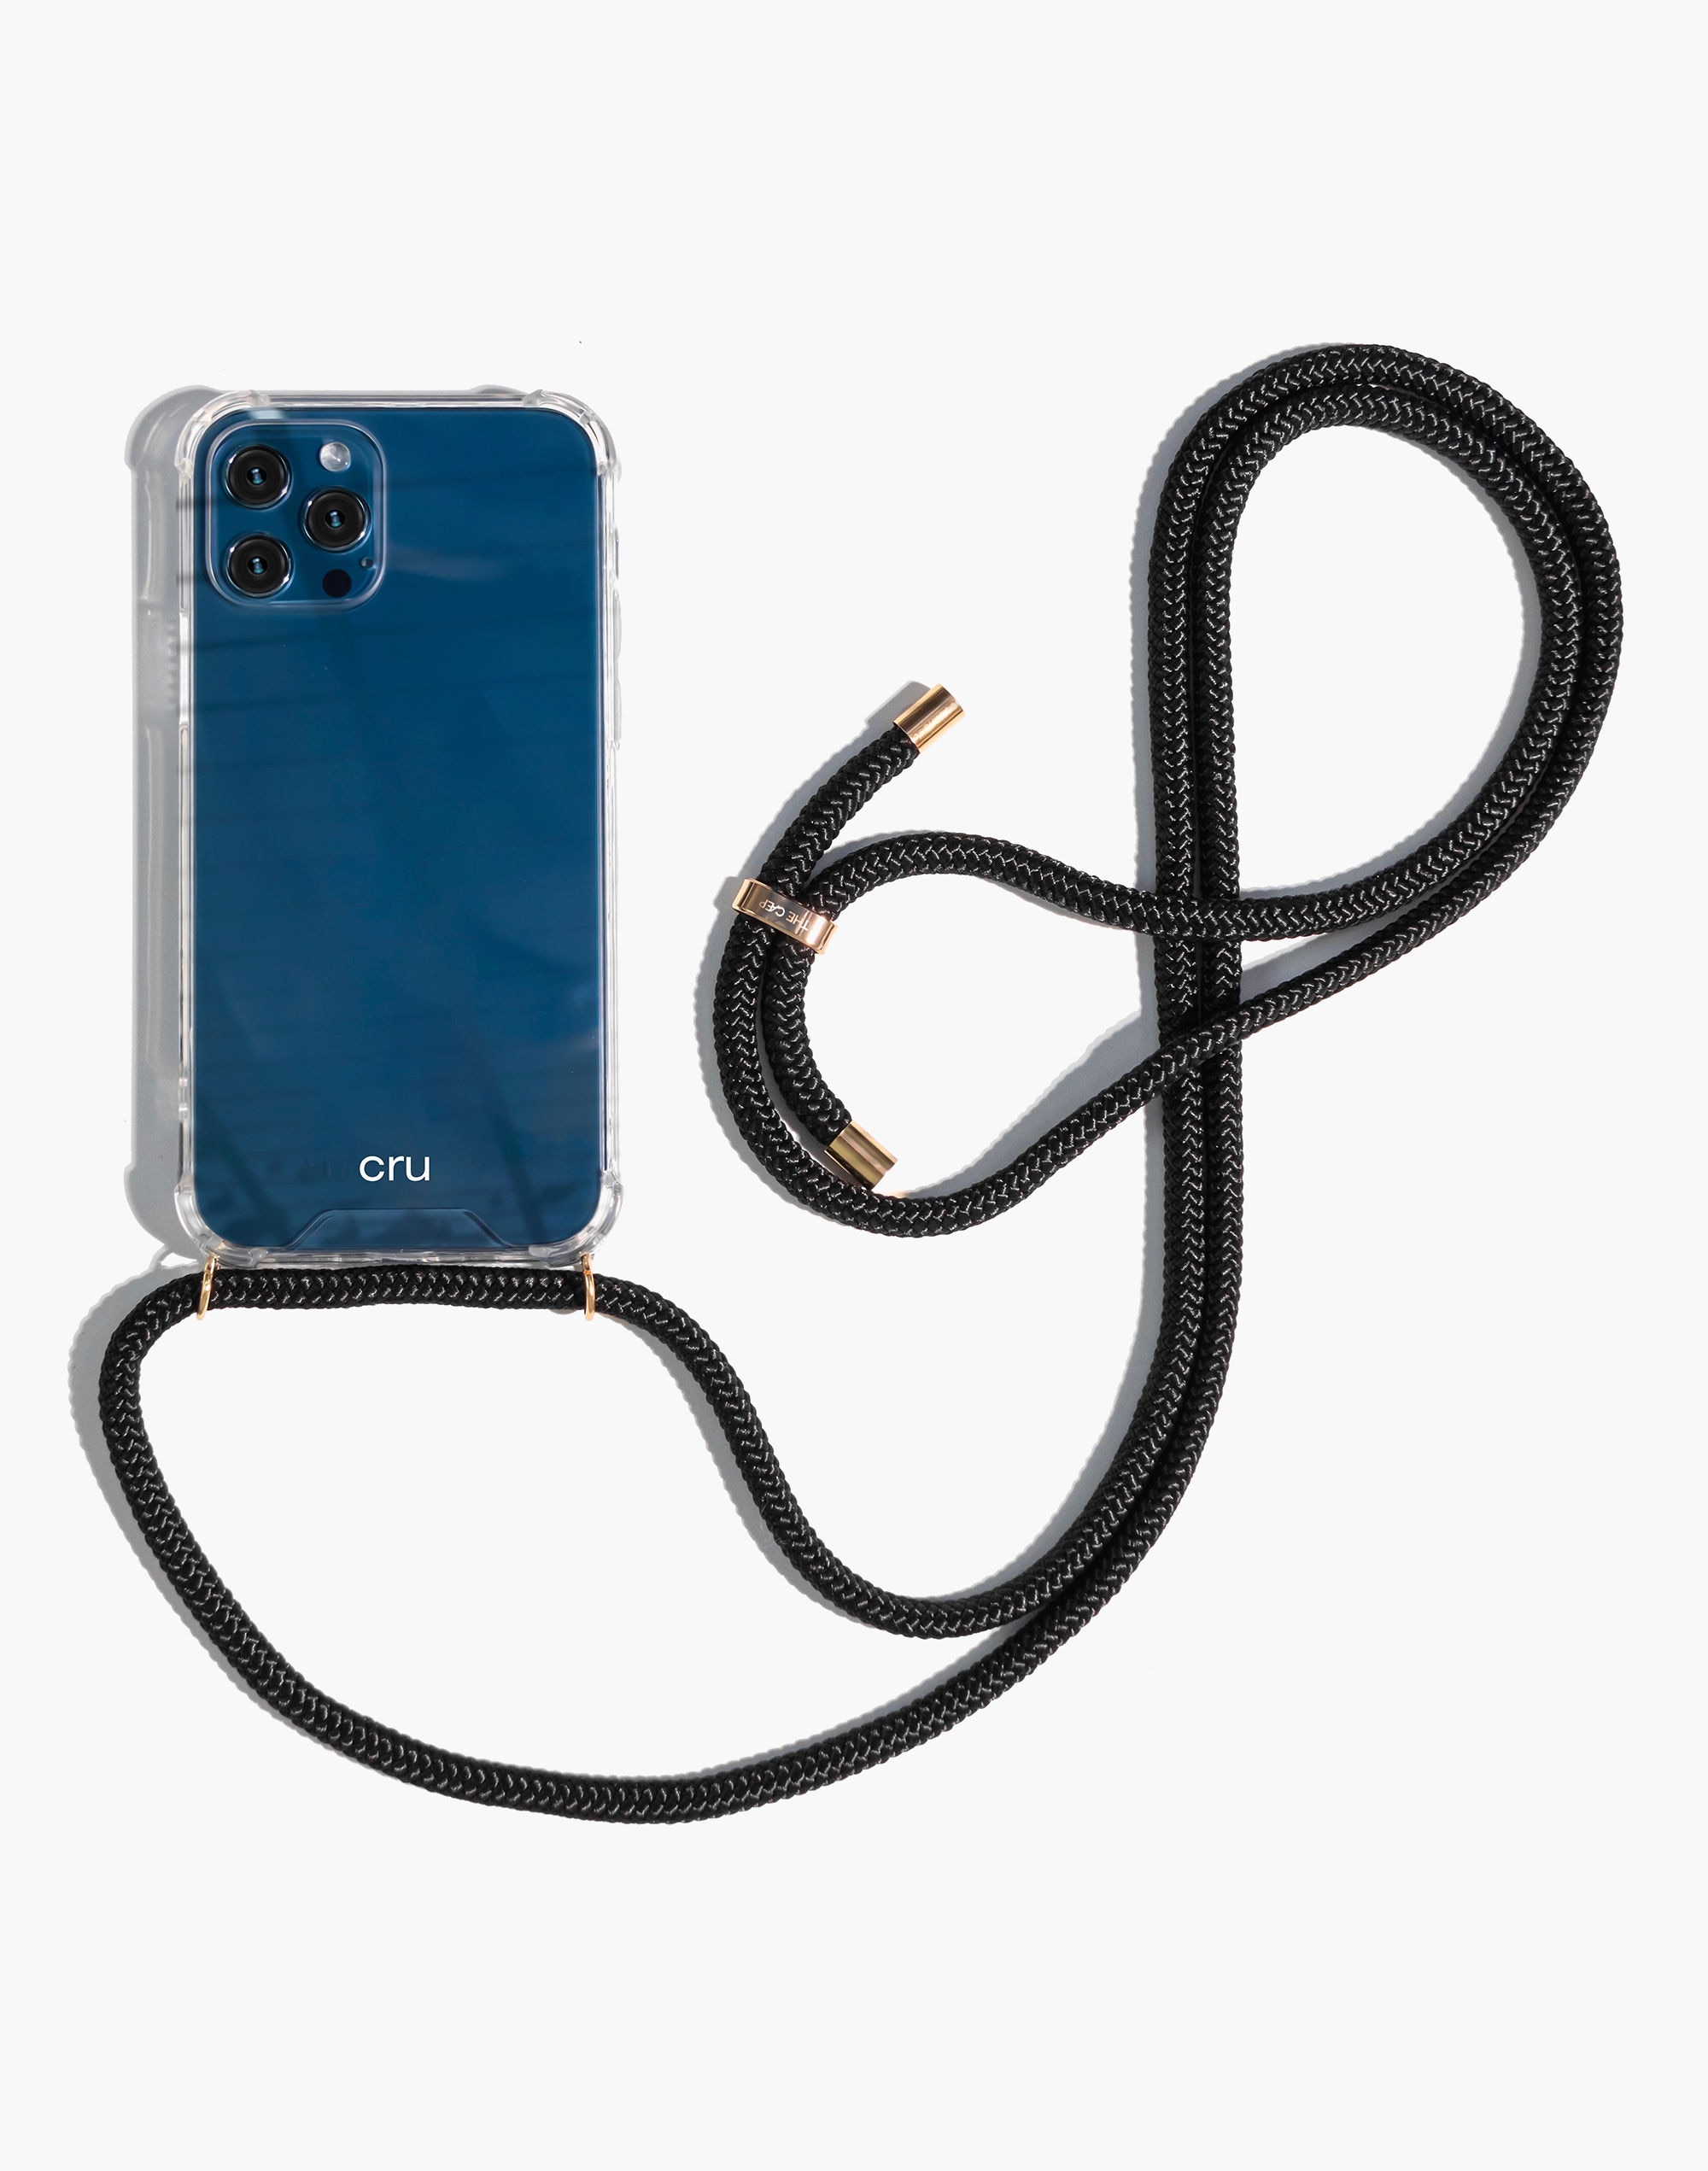 THE CAEP Crossbody Phone Case in Queensland Monochrome